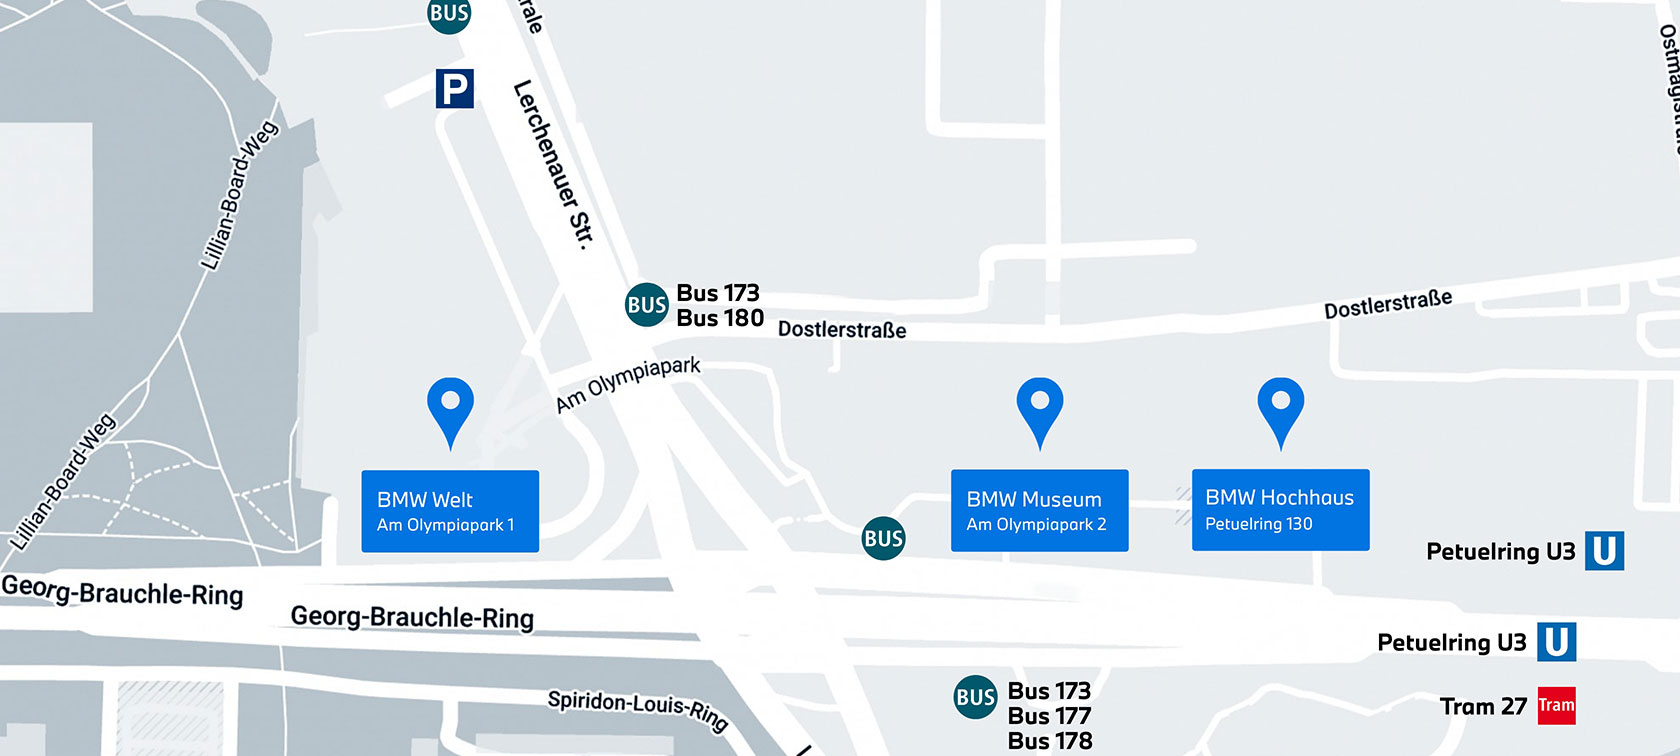 Location Map of the BMW Welt and BMW Museum in the Olympiapark Munich